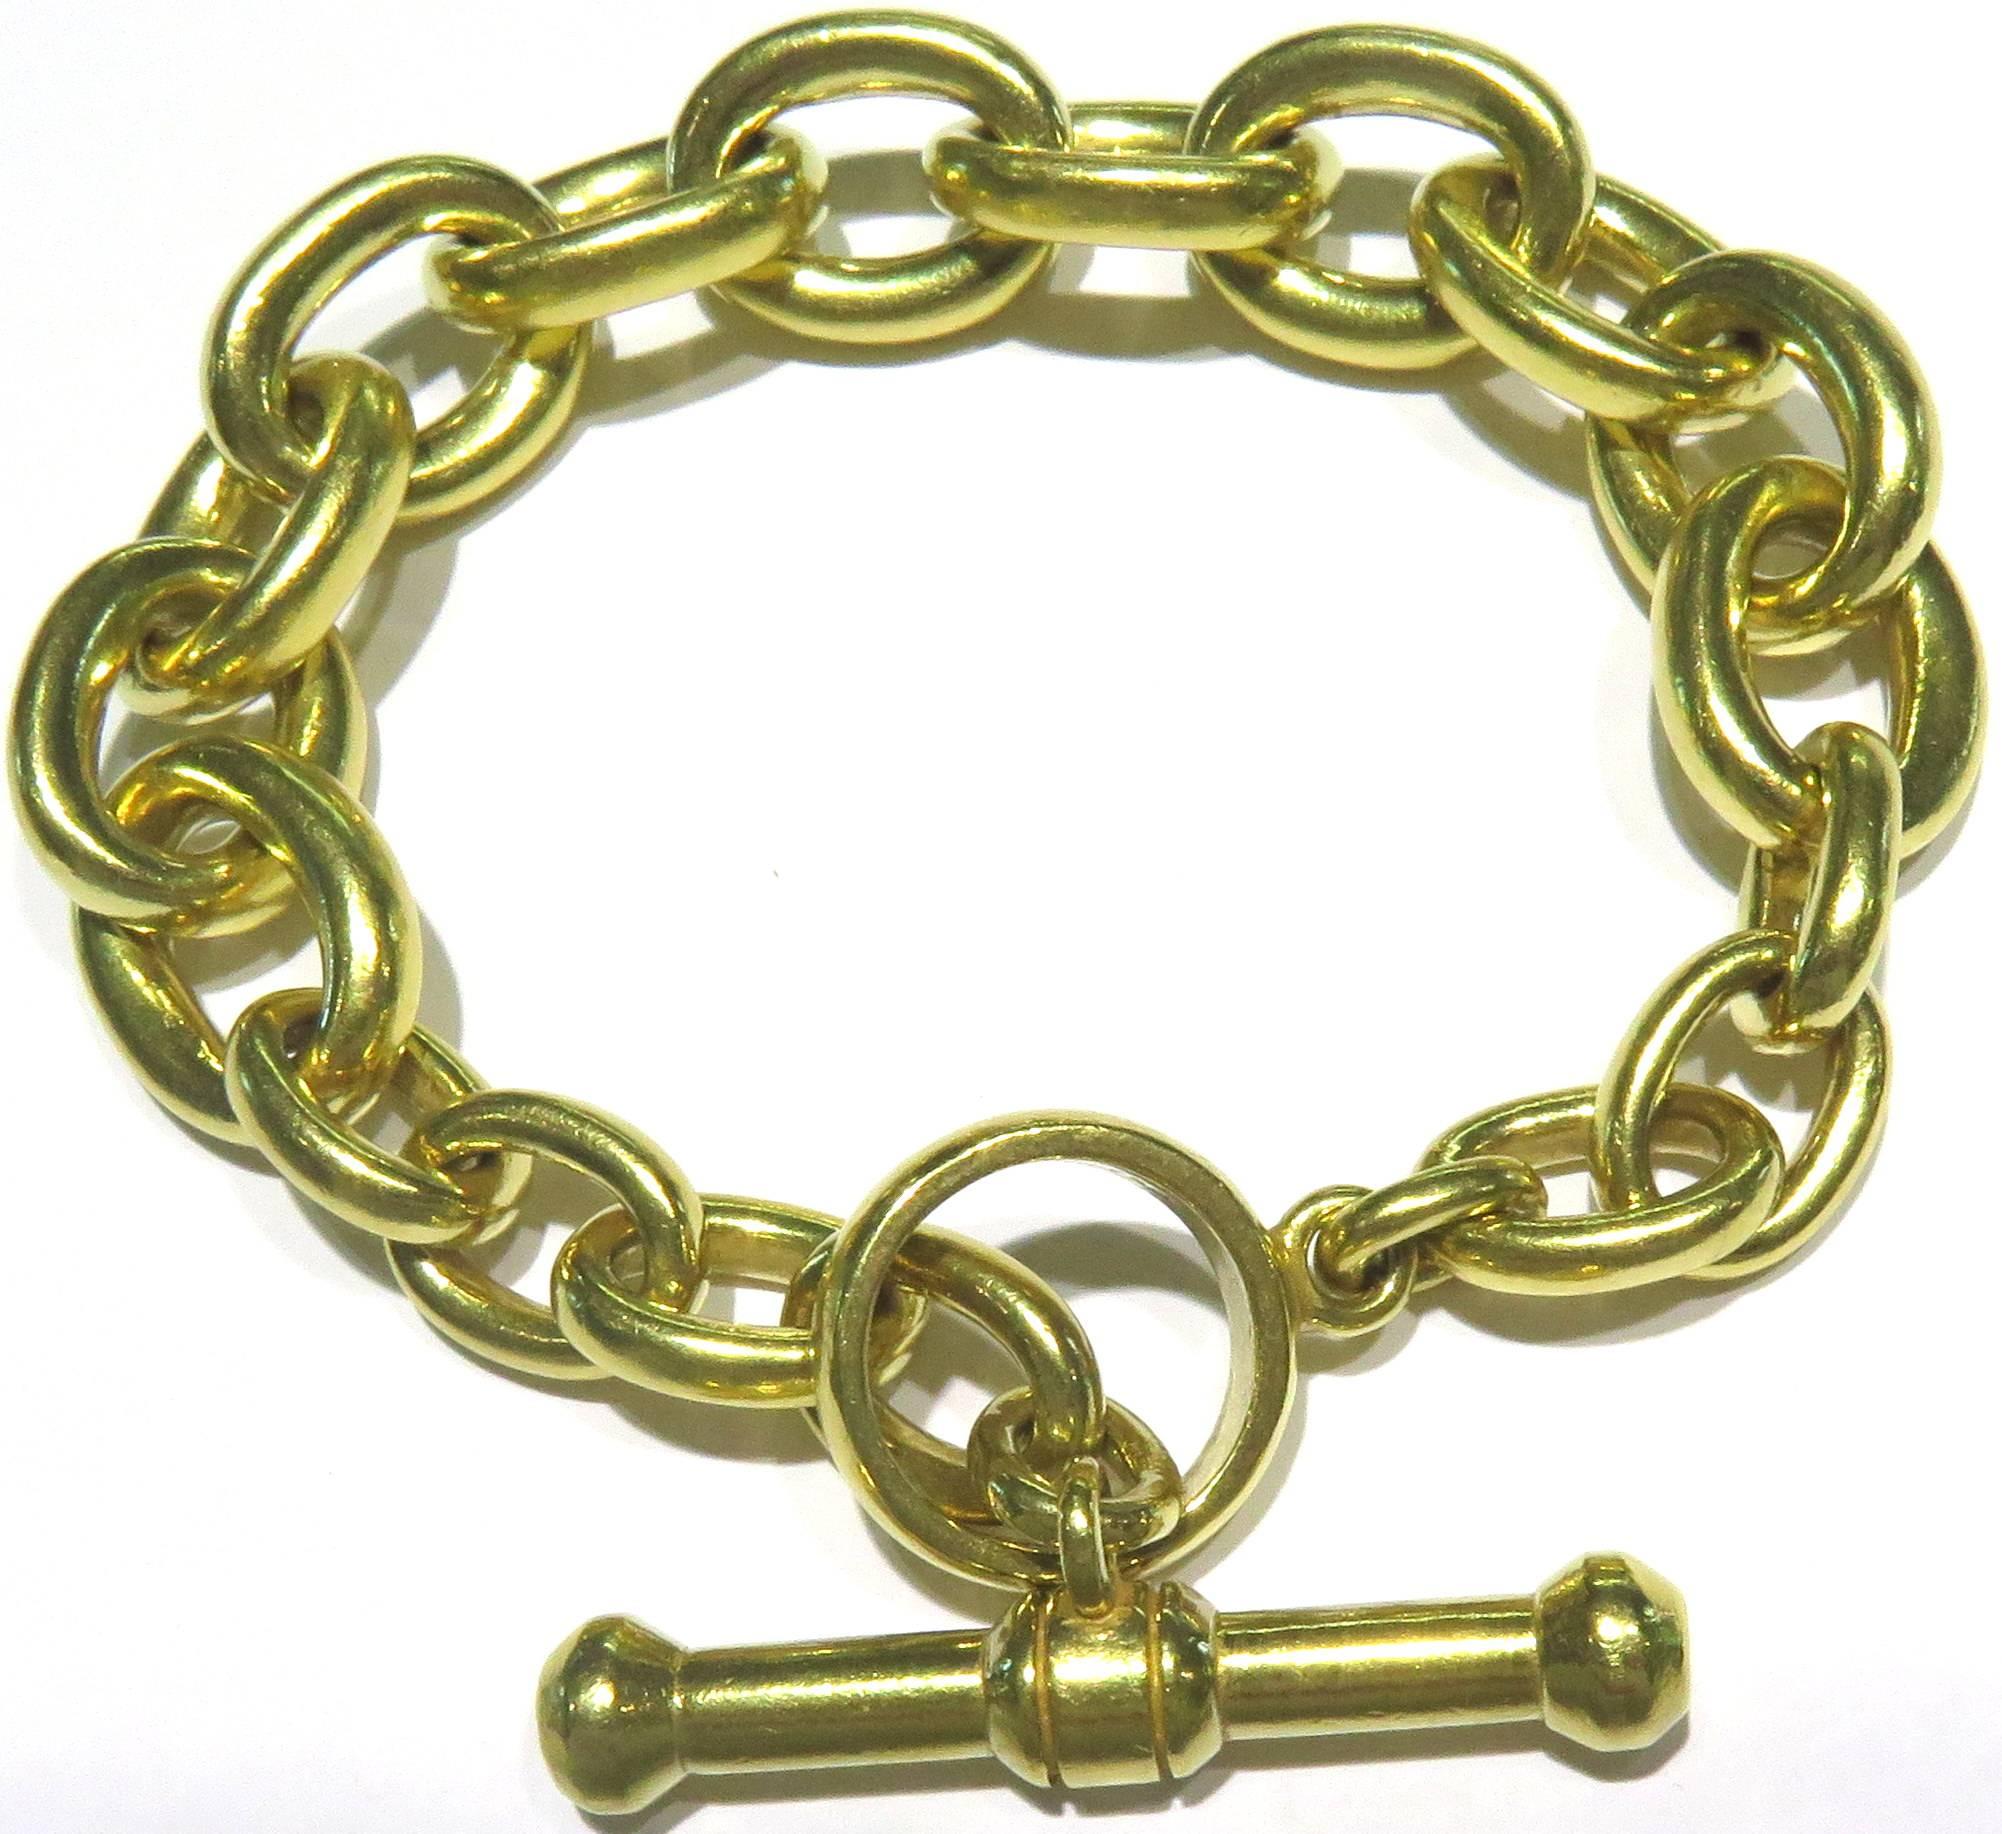 1984 Classic Early Kieselstein Cord Exceptionally Heavy Gold Toggle Bracelet 3